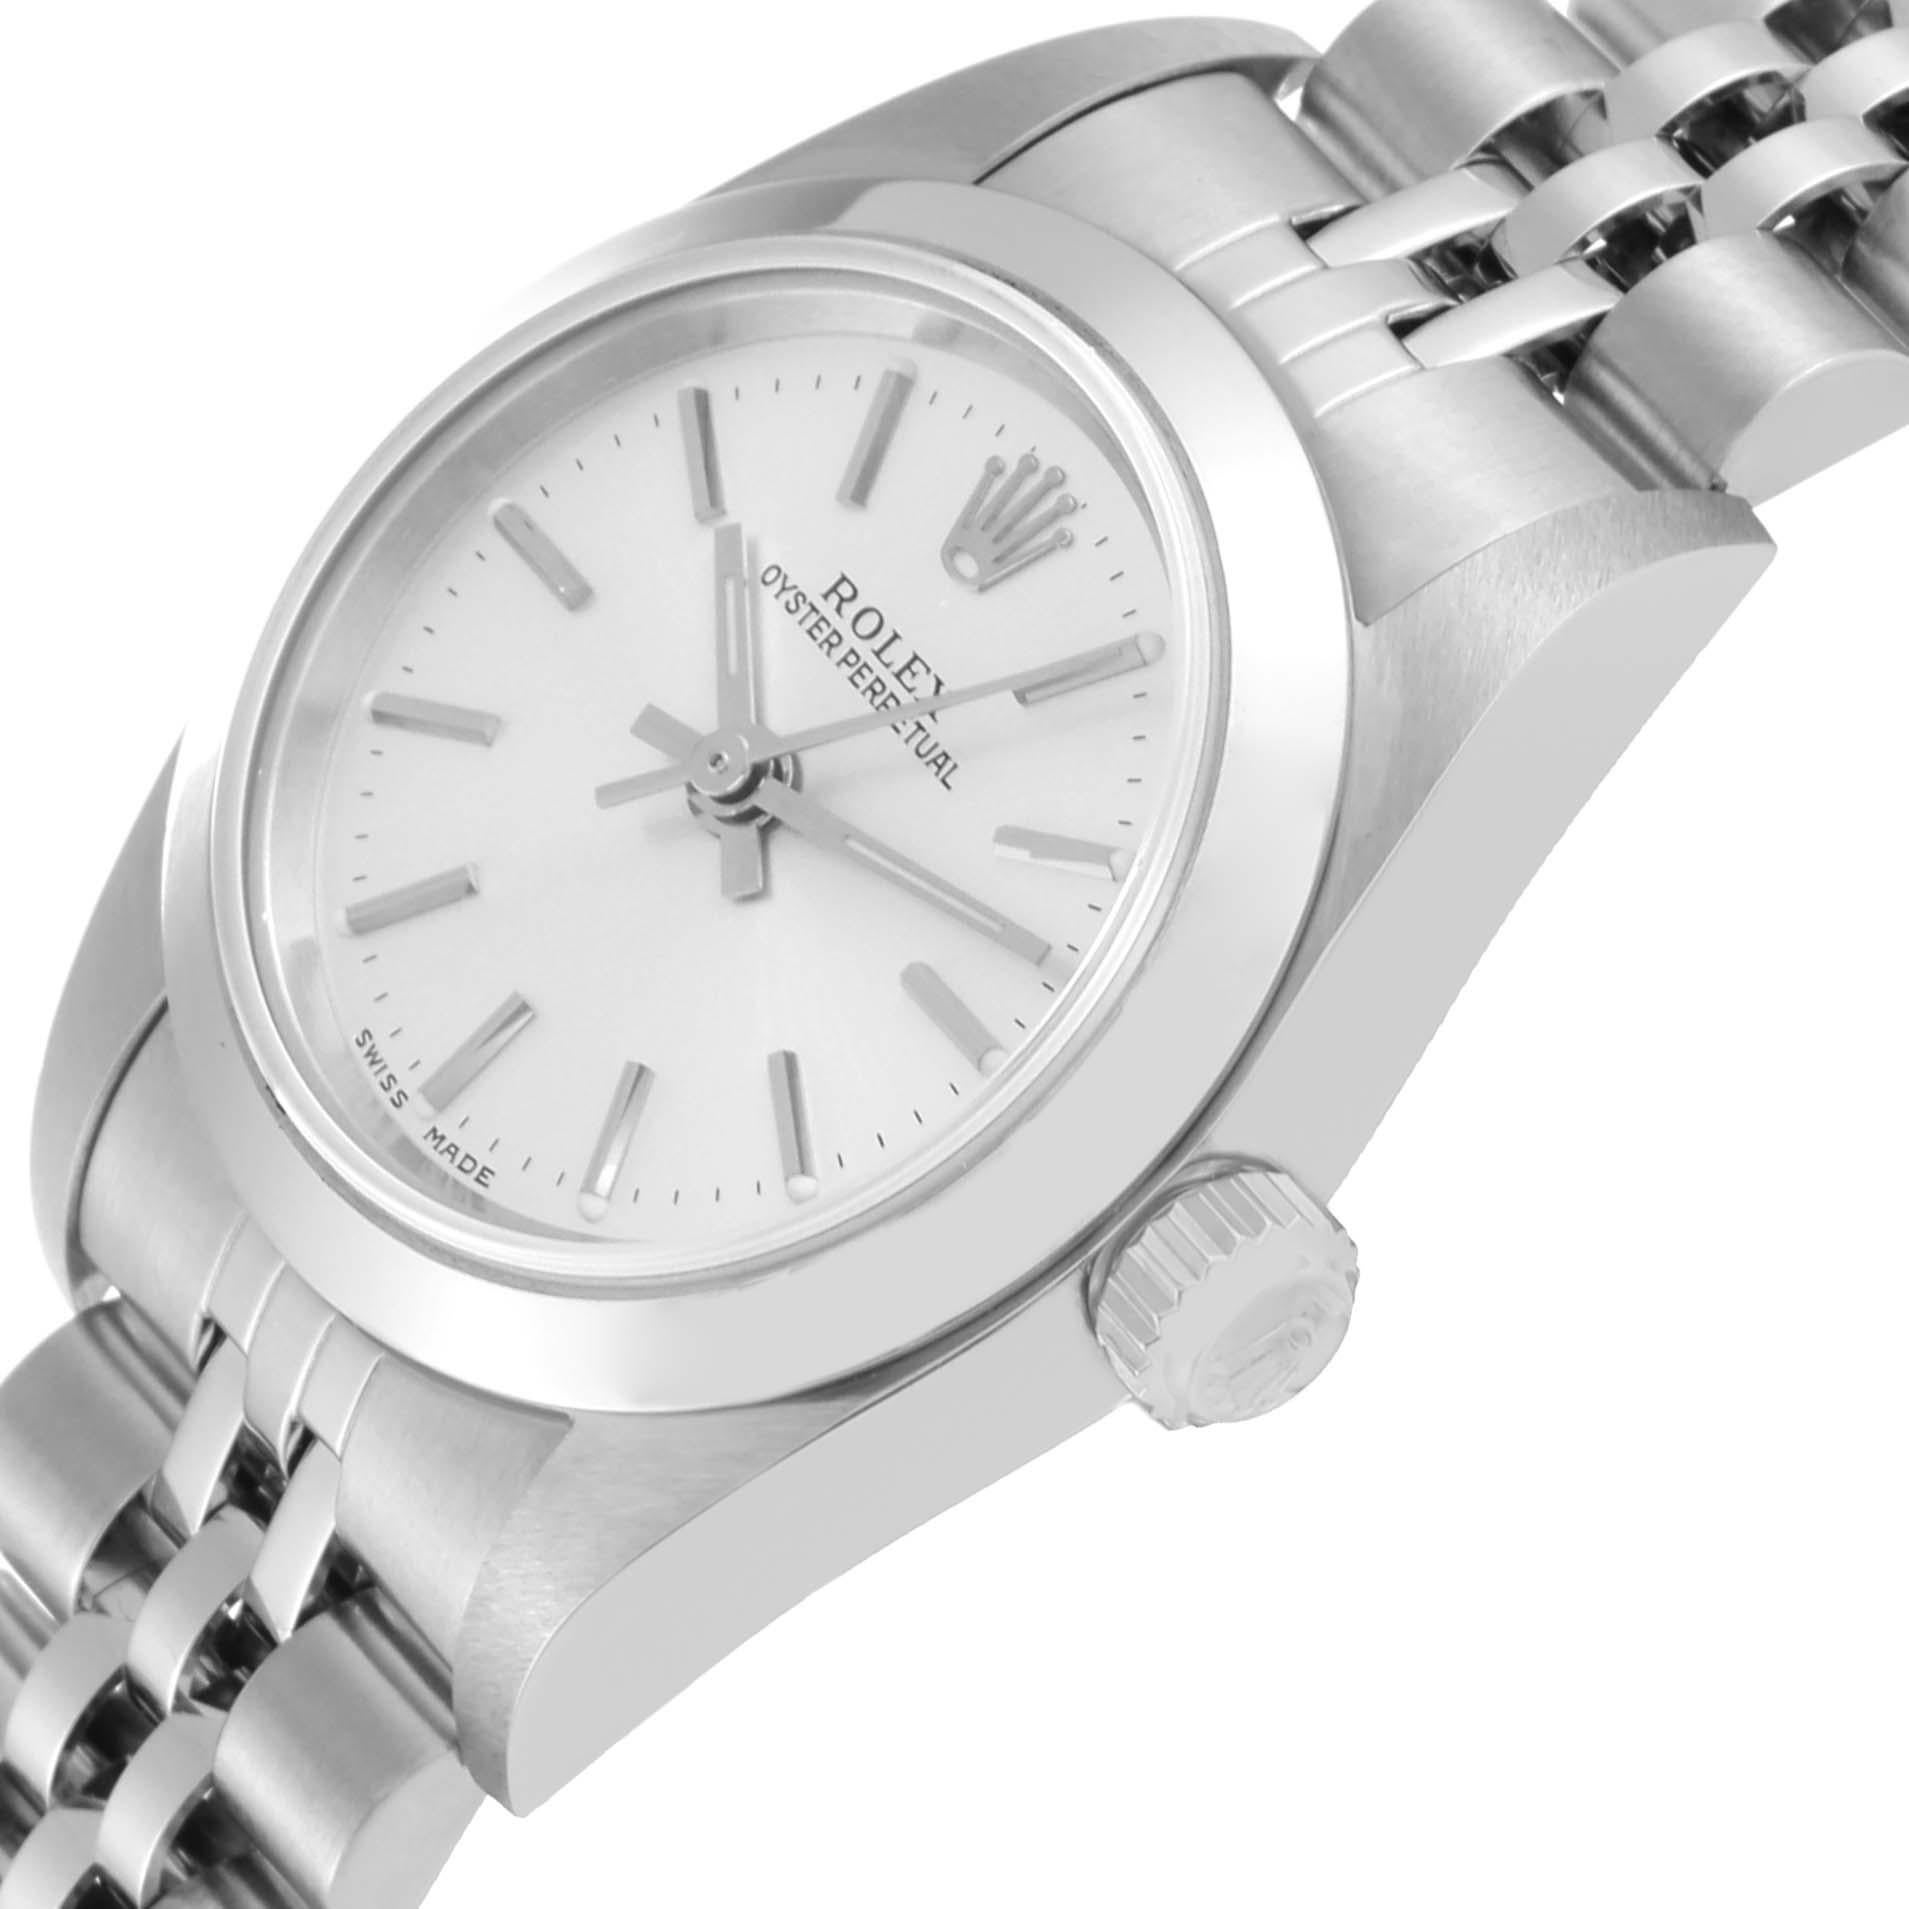 Rolex Oyster Perpetual Non-Date Silver Dial Steel Ladies Watch 76080 Box Papers. Officially certified chronometer automatic self-winding movement. Stainless steel oyster case 24 mm in diameter. Rolex logo on the crown. Stainless steel smooth bezel.